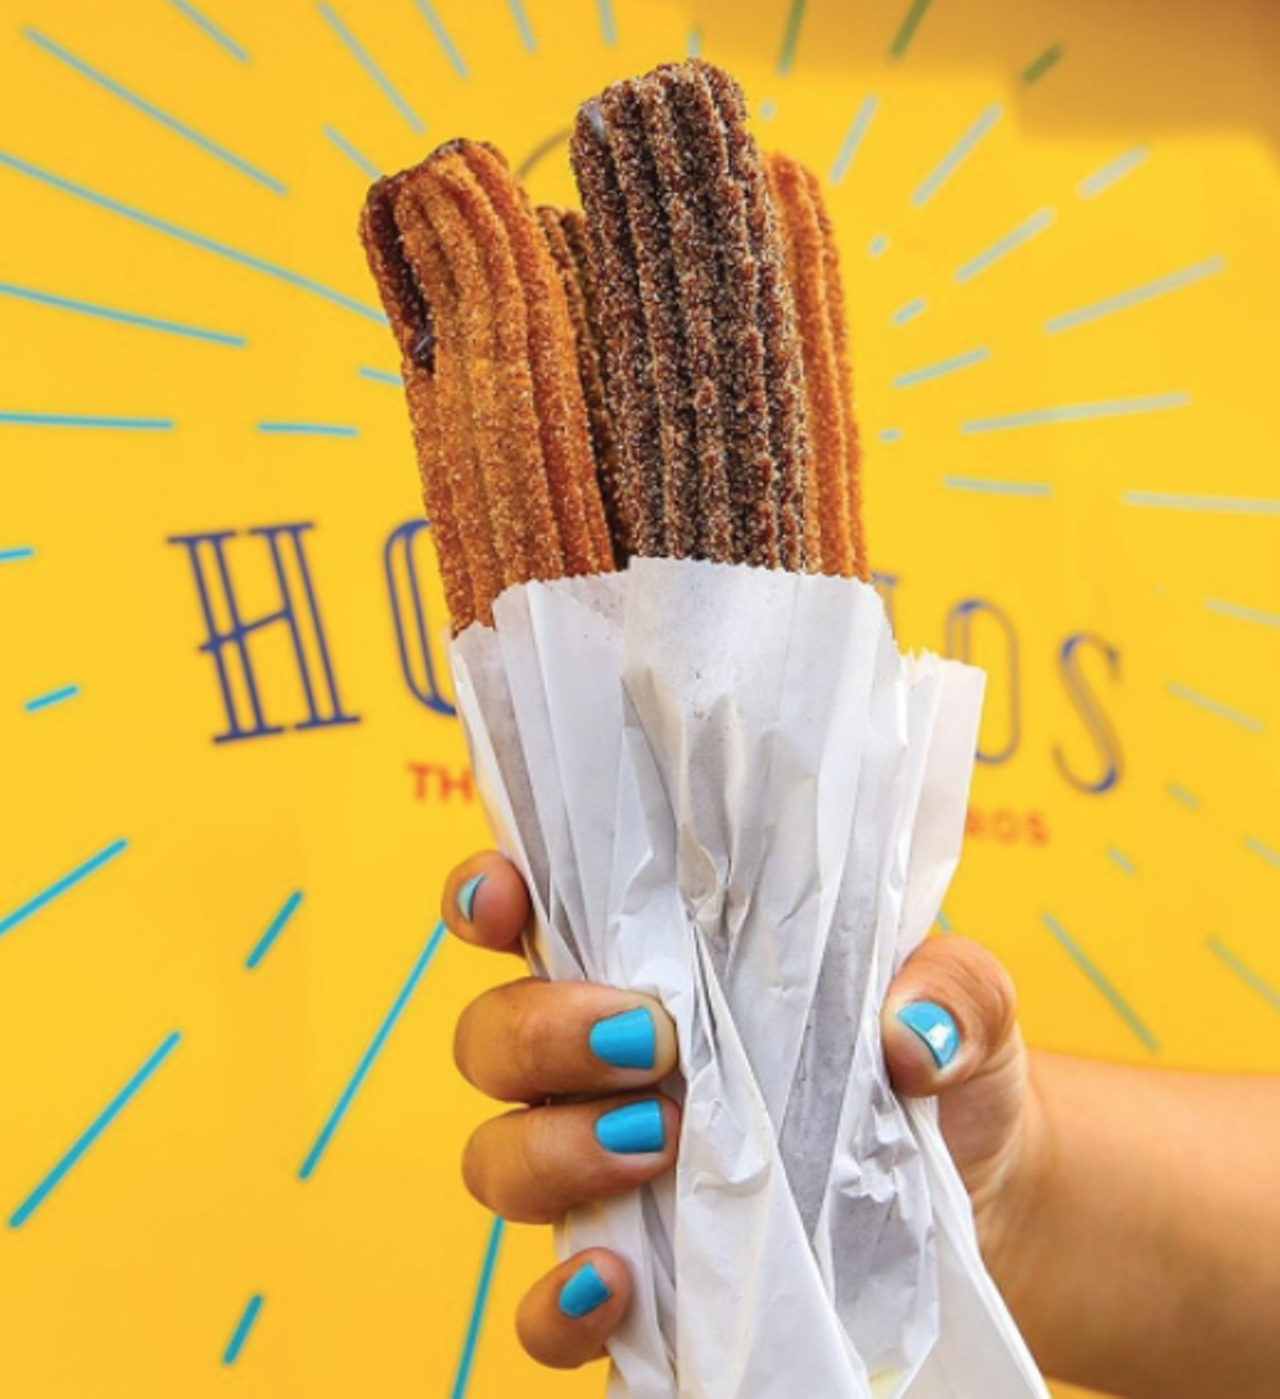 Honchos The House of Churros
5824 Babcock Road, (206) 304-6771
Choose whether to have your churro dipped, filled or frozen at this food truck. Add flavor drips like cajeta or top it off with some bacon for an extra treat.
Photo via Instagram, gohonchos